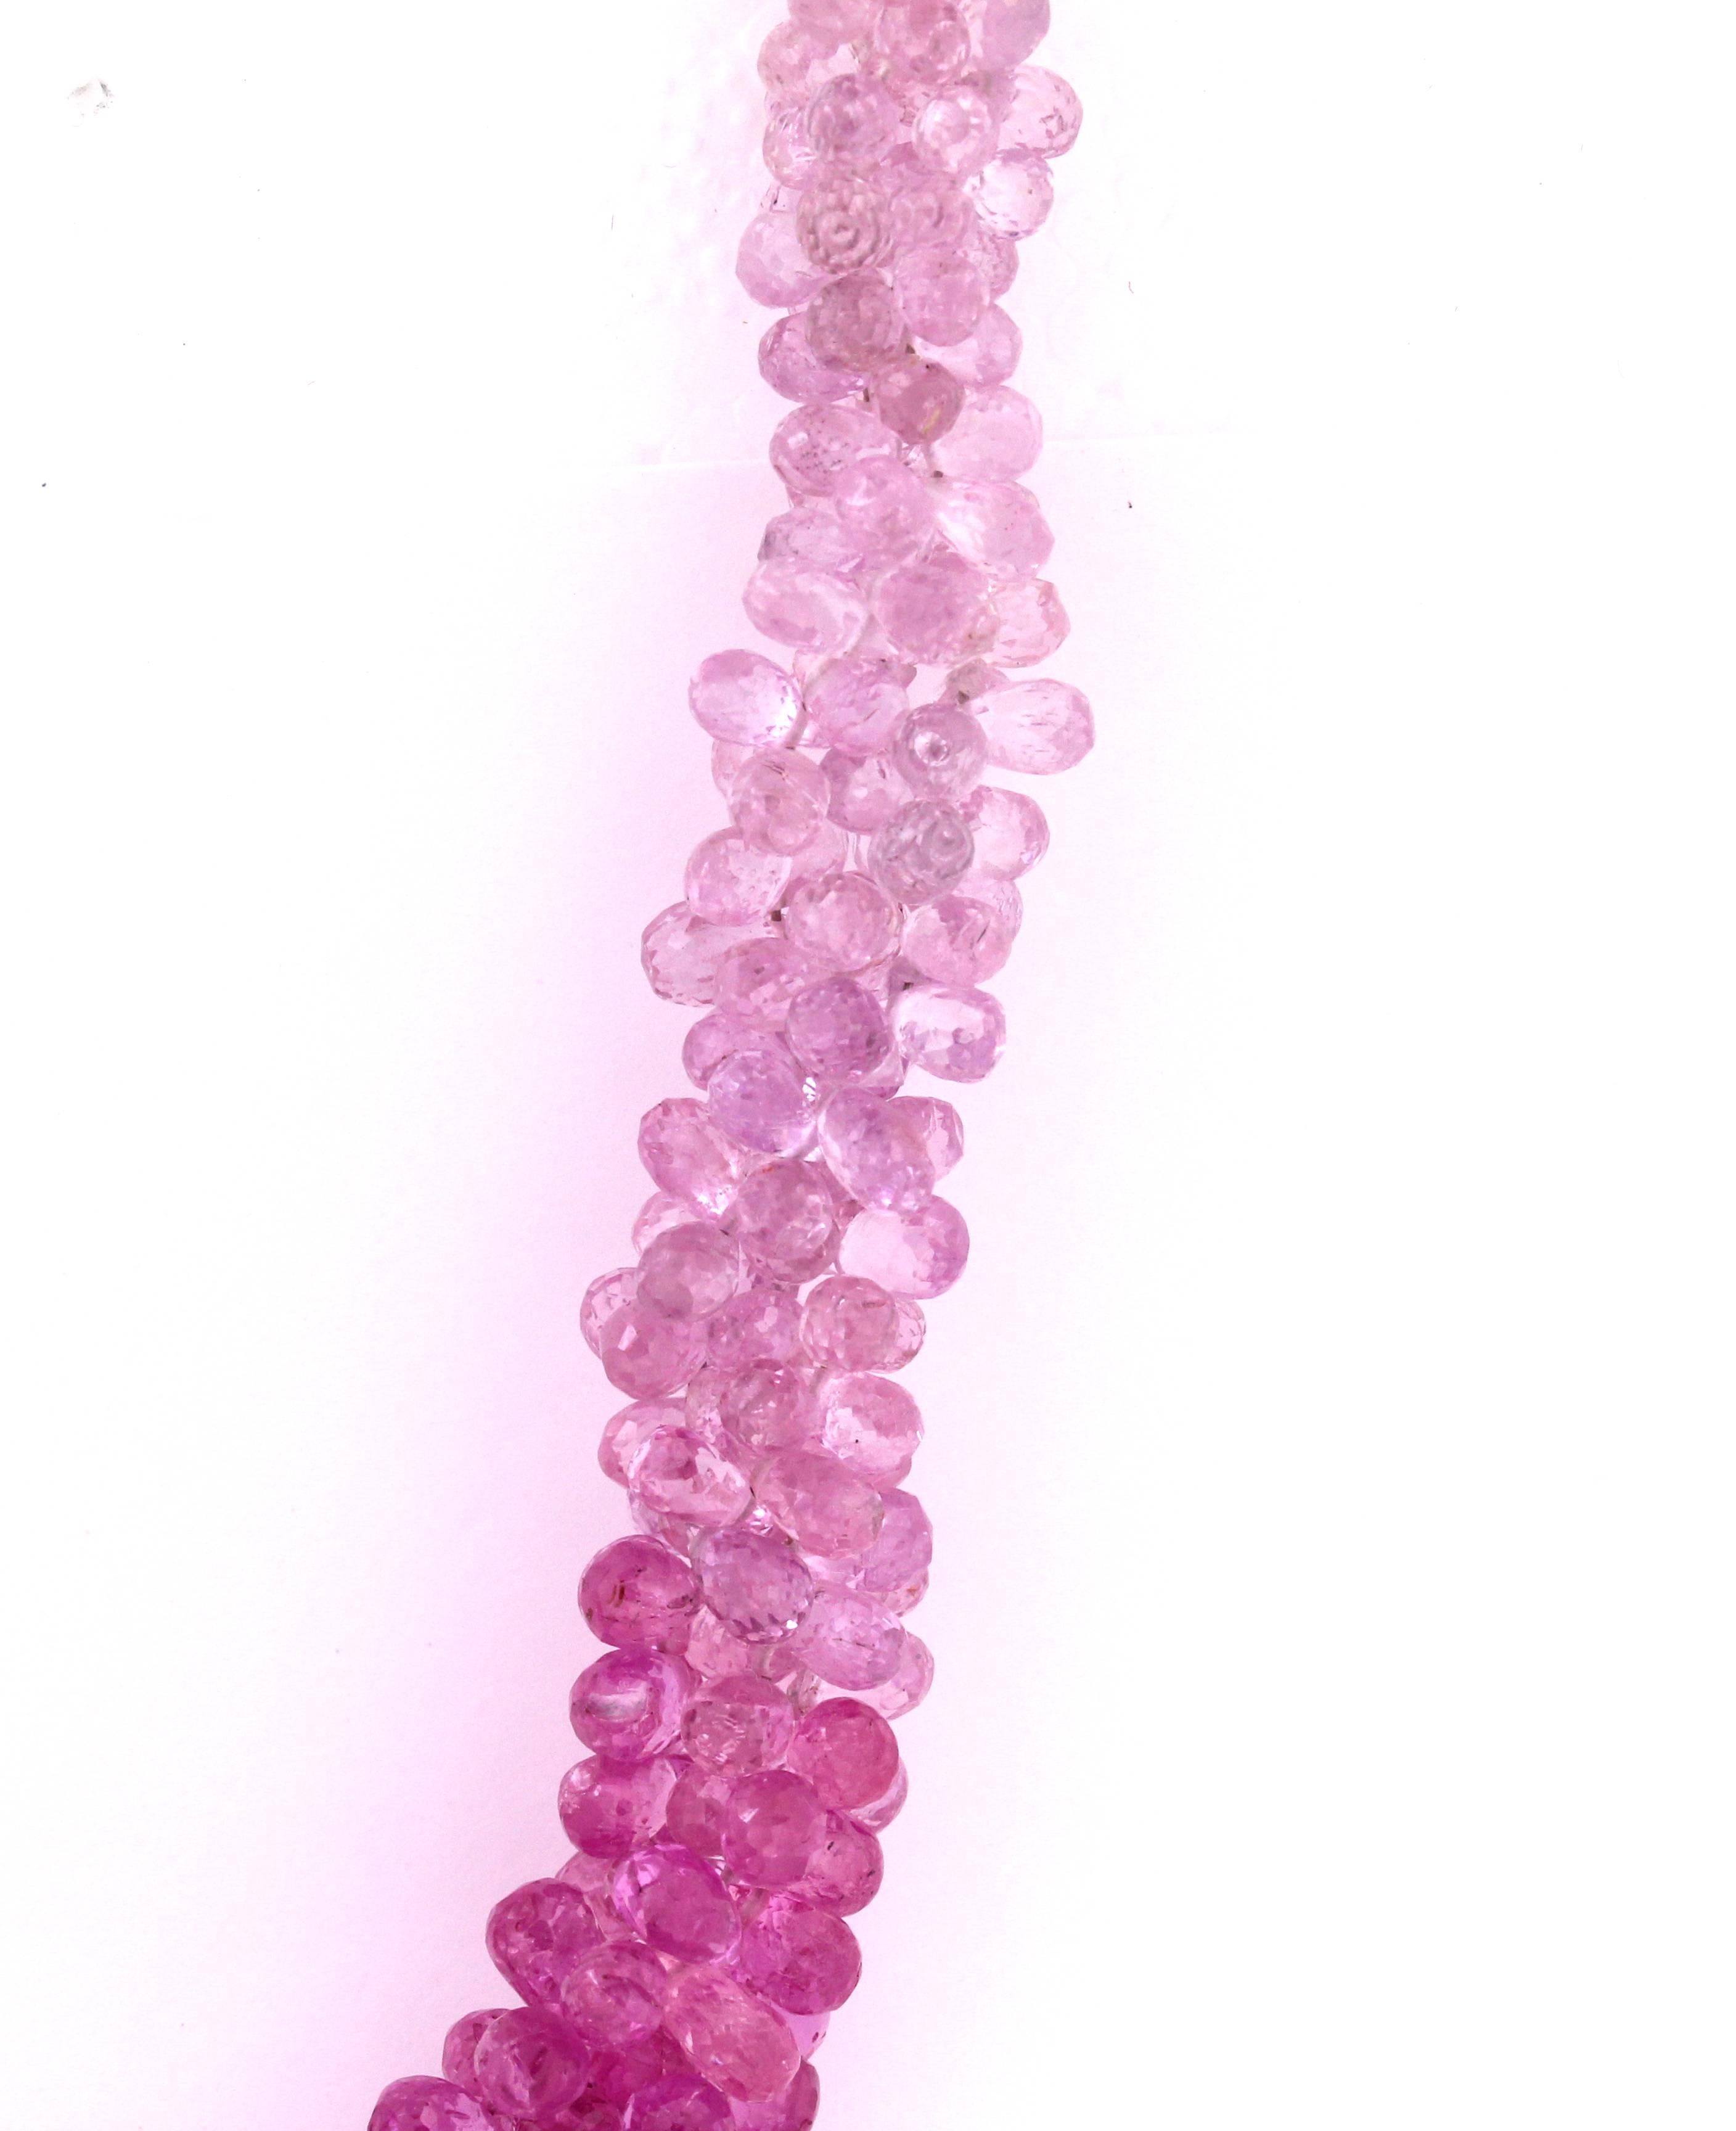 Shaded Pink Sapphire Beads Necklace with 18K Gold clasp Necklace

Pink Sapphires are shaded from light to dark pink in remarkable color coordination.

381.85ct. Pink Sapphires total weight

18K Gold lobster clasp is used 

Necklace is 18 inches in